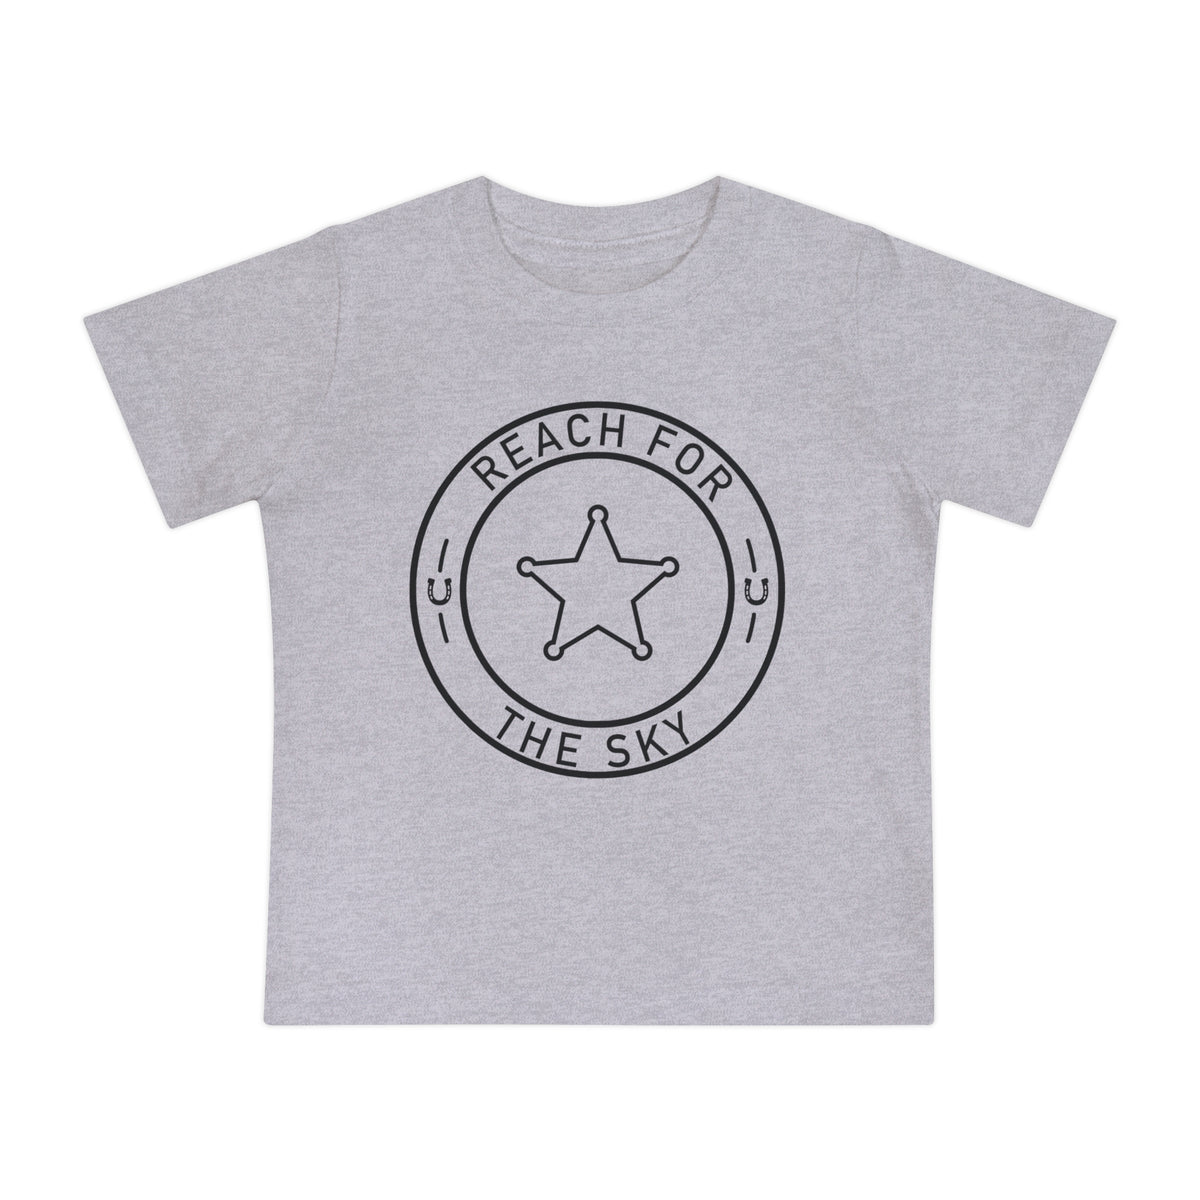 Reach For The Sky Bella Canvas Baby Short Sleeve T-Shirt